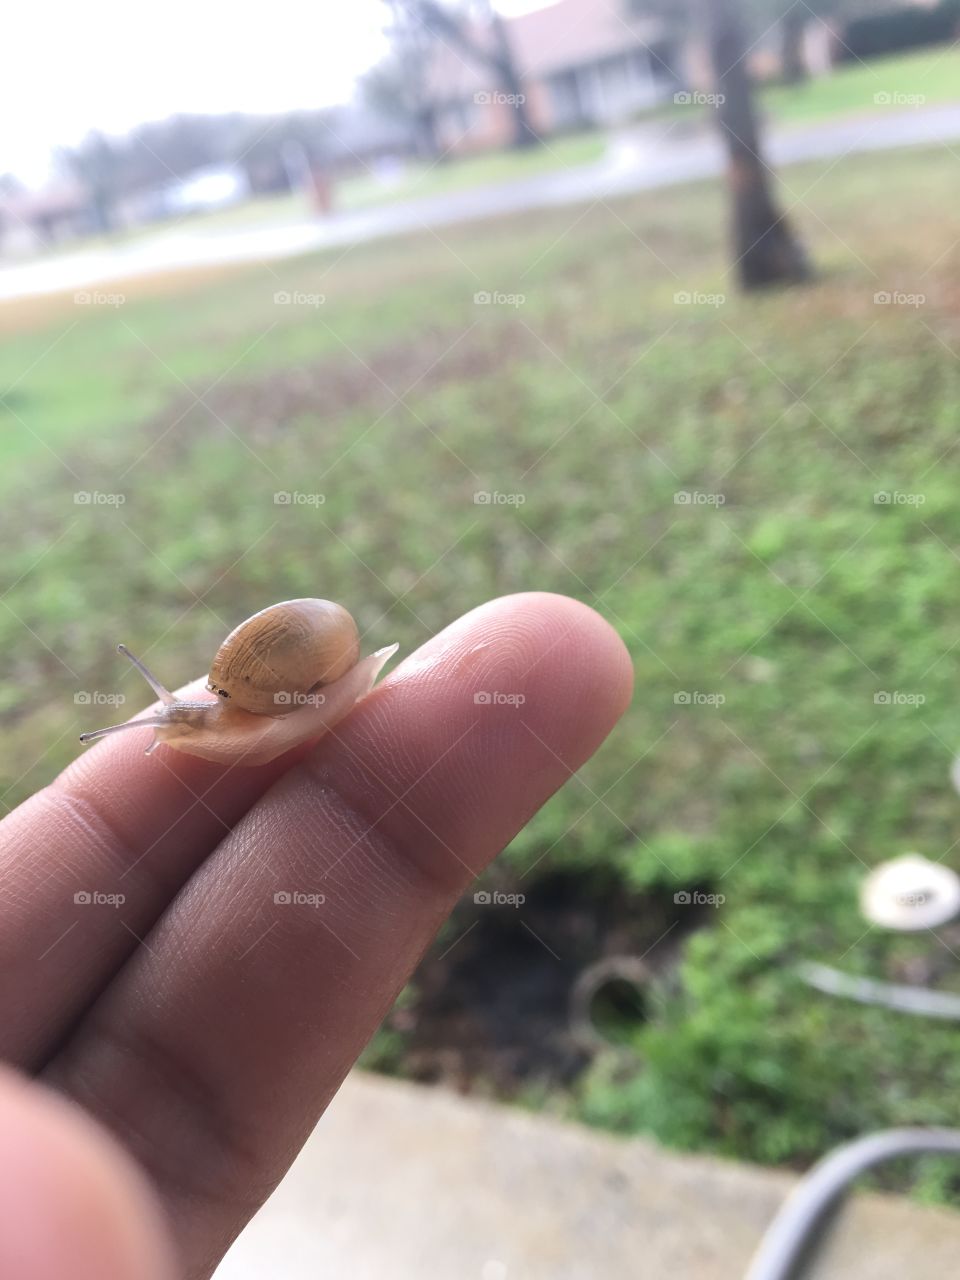 Life of a baby snail